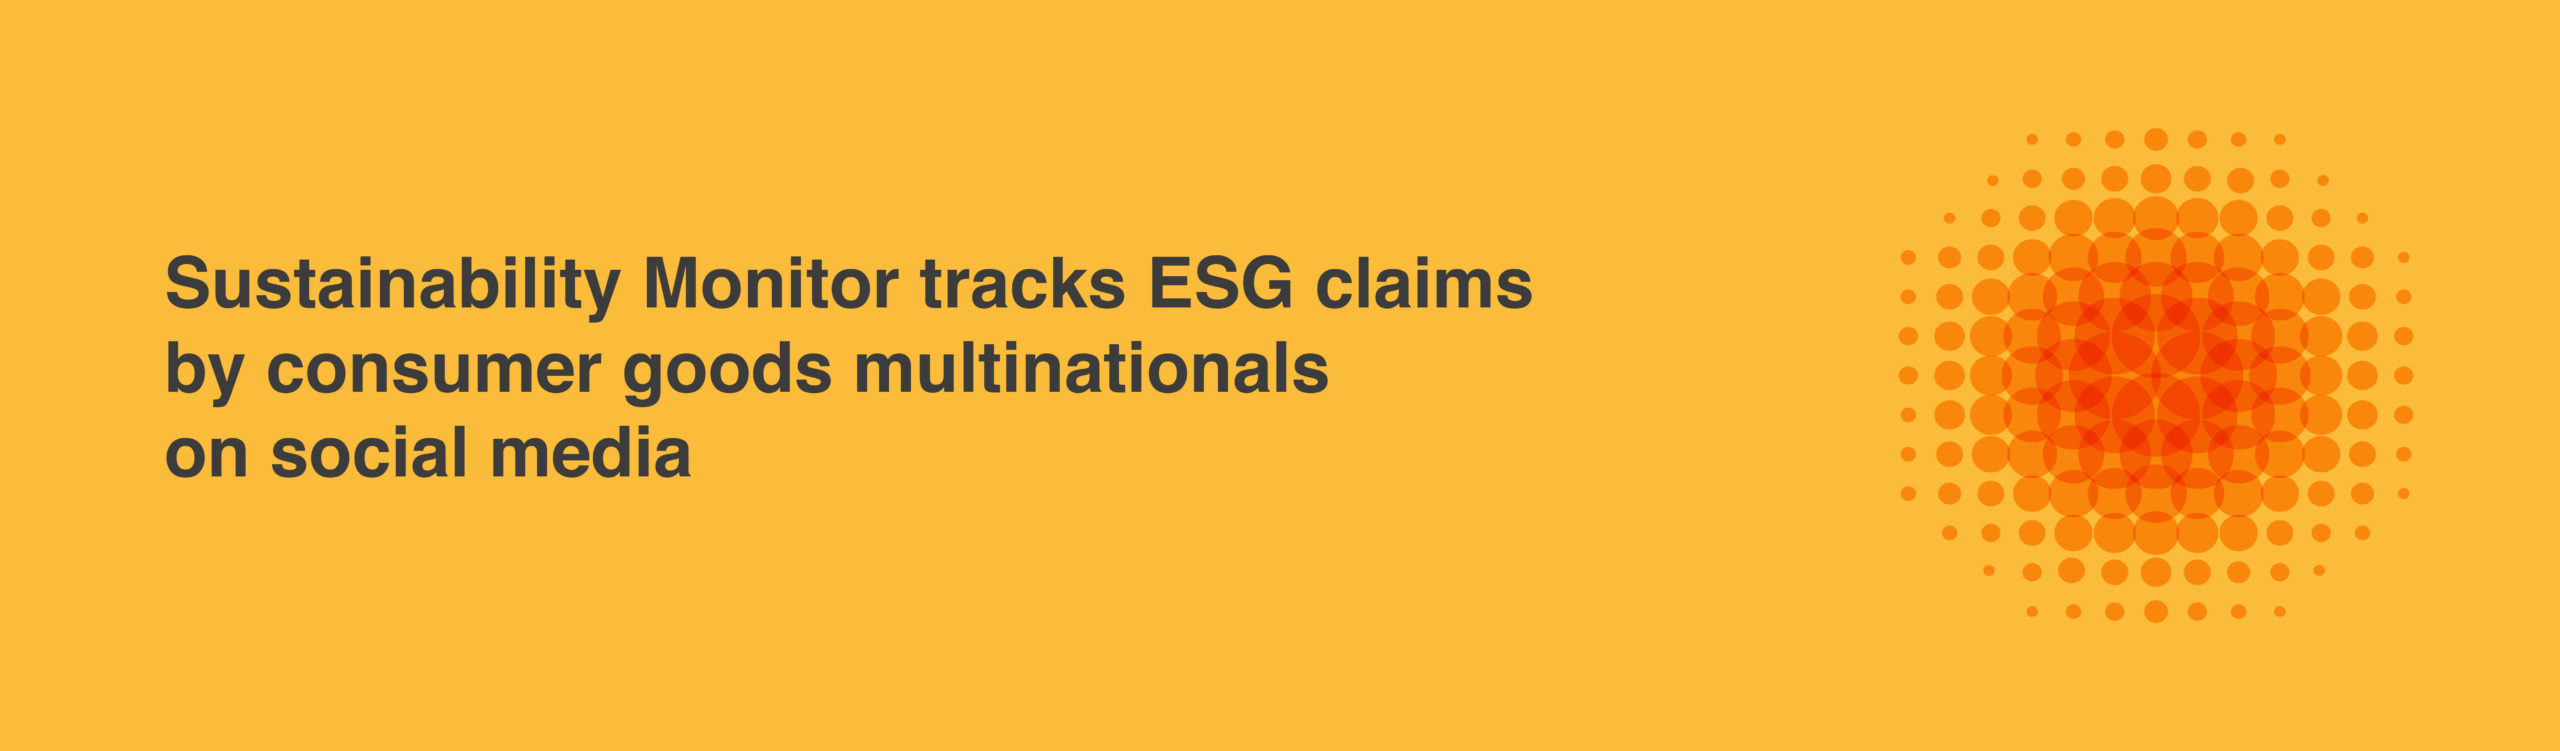 Sustainability Monitor tracks ESG claims by consumer goods multinationals on social media